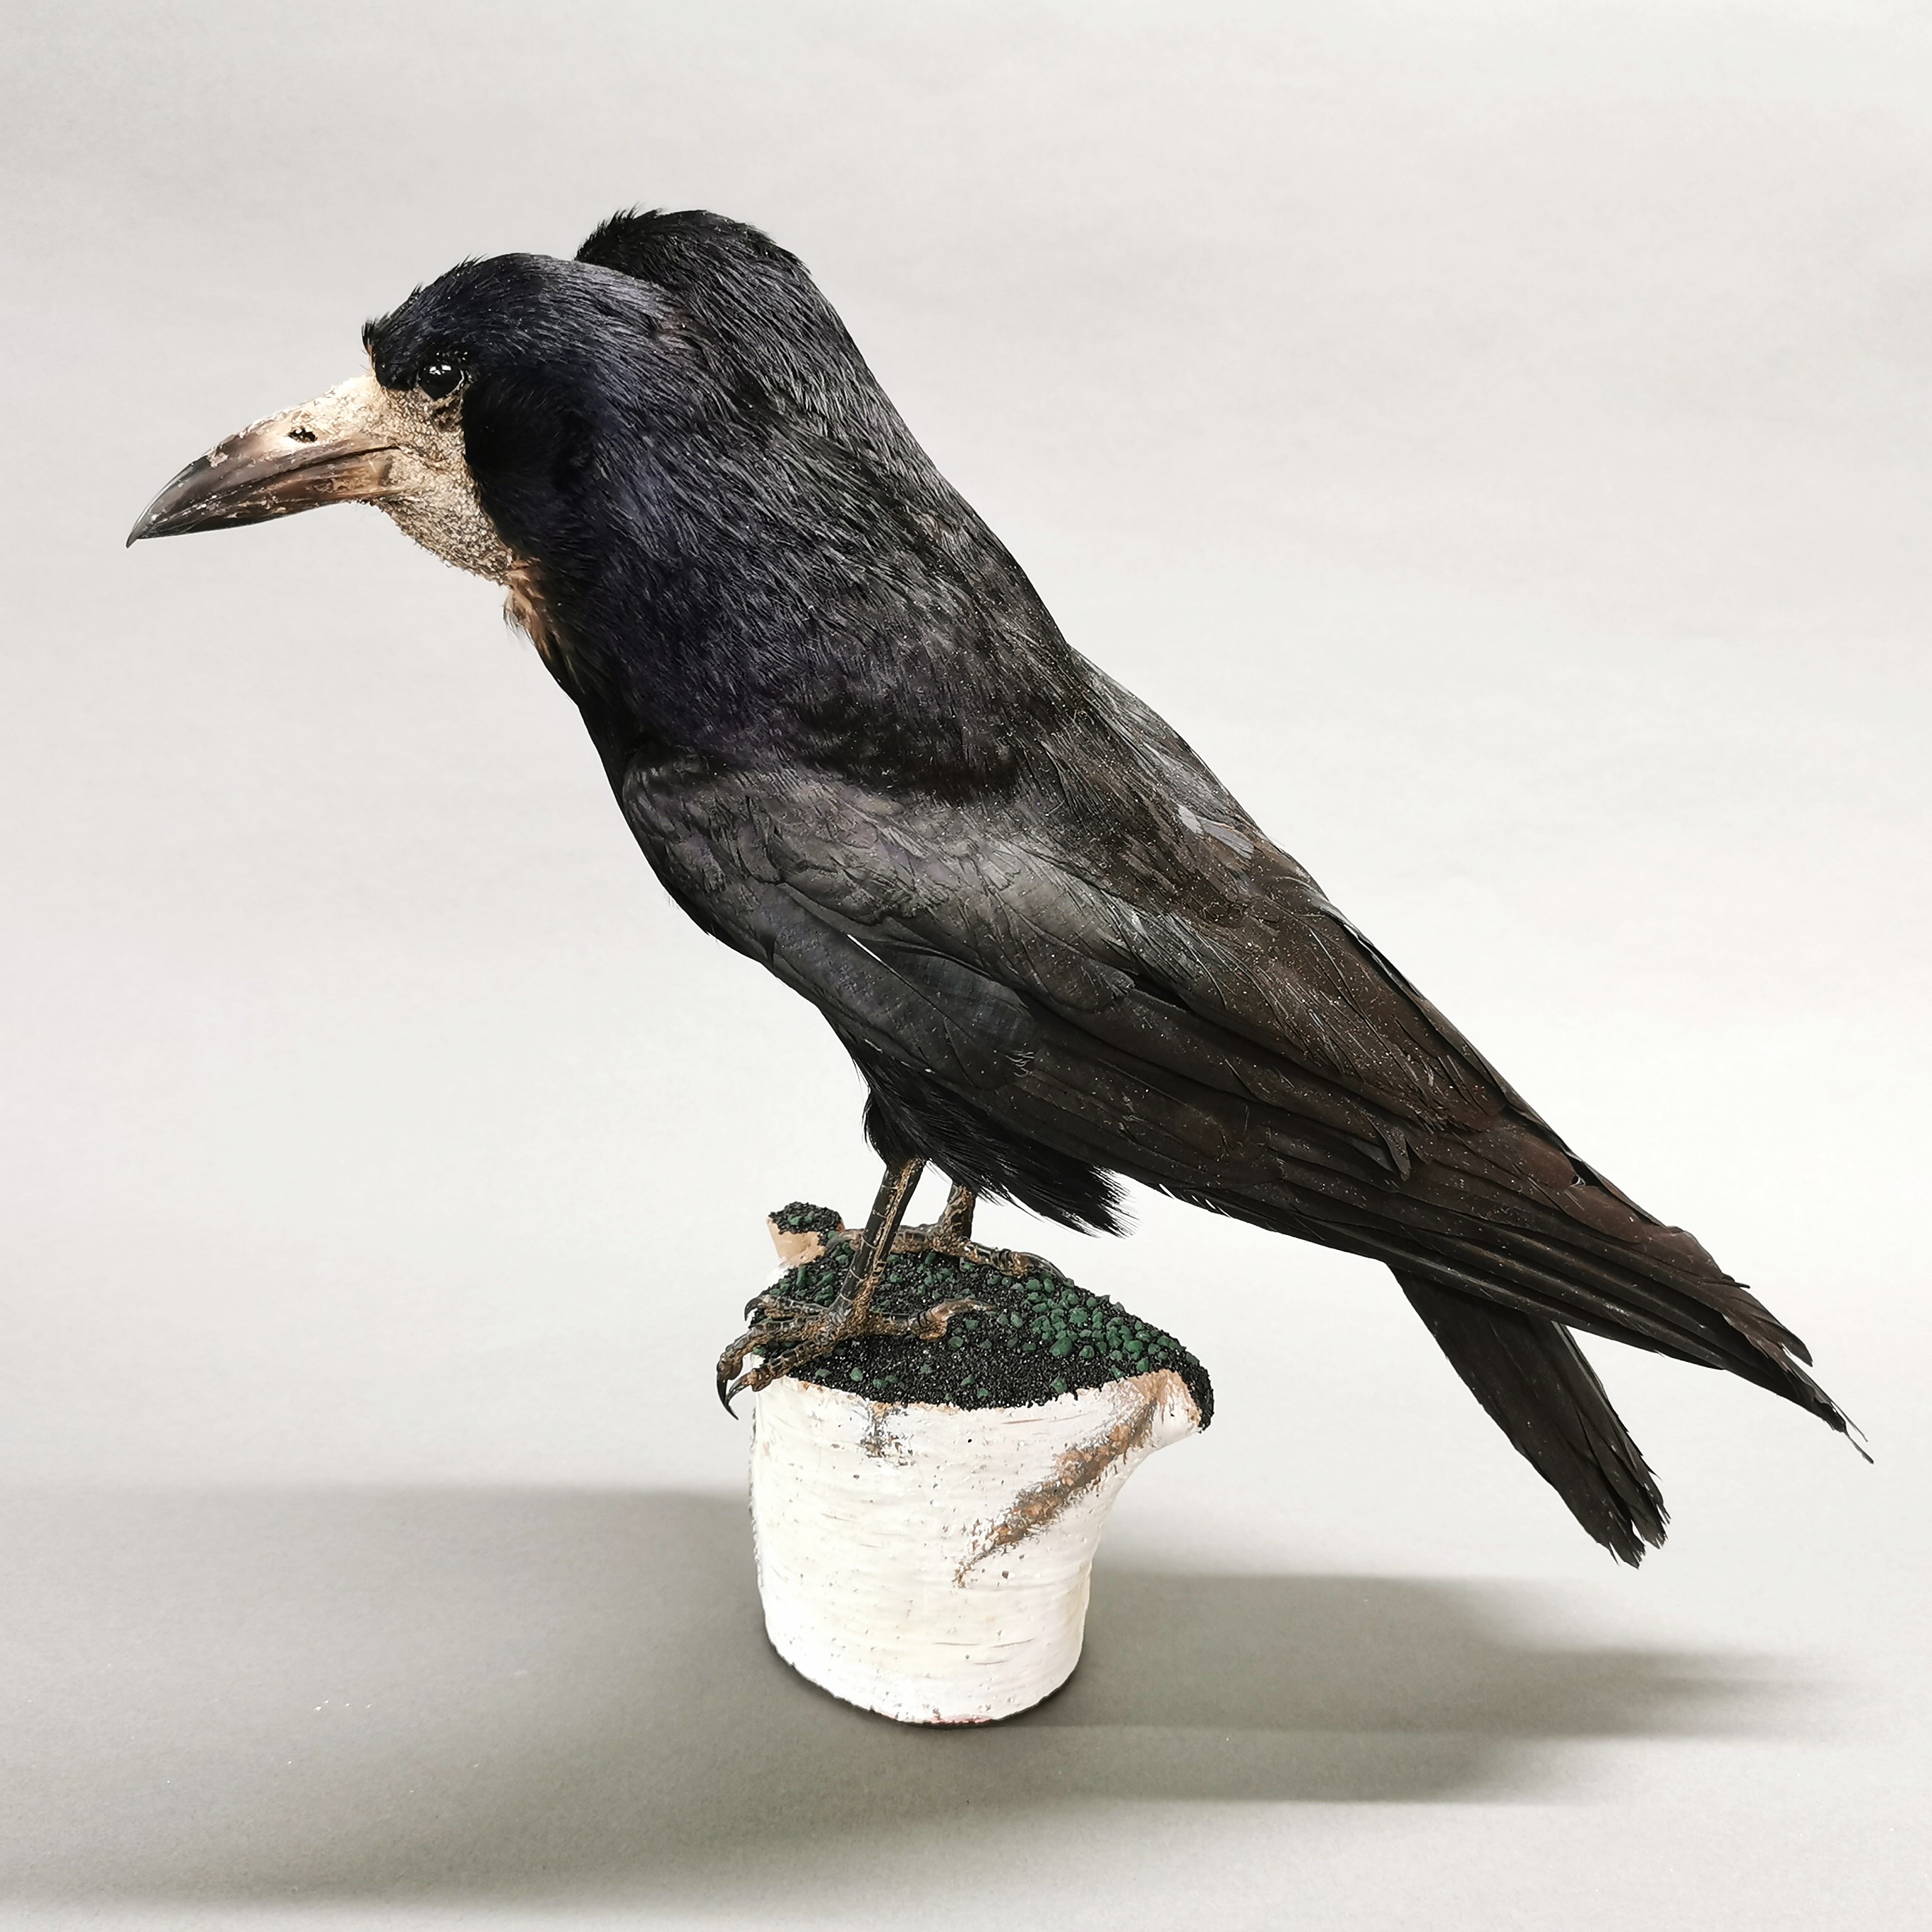 Taxidermy interest: Freak “Two-Headed Rook”, an interesting full mount rook with additional head. - Image 2 of 4